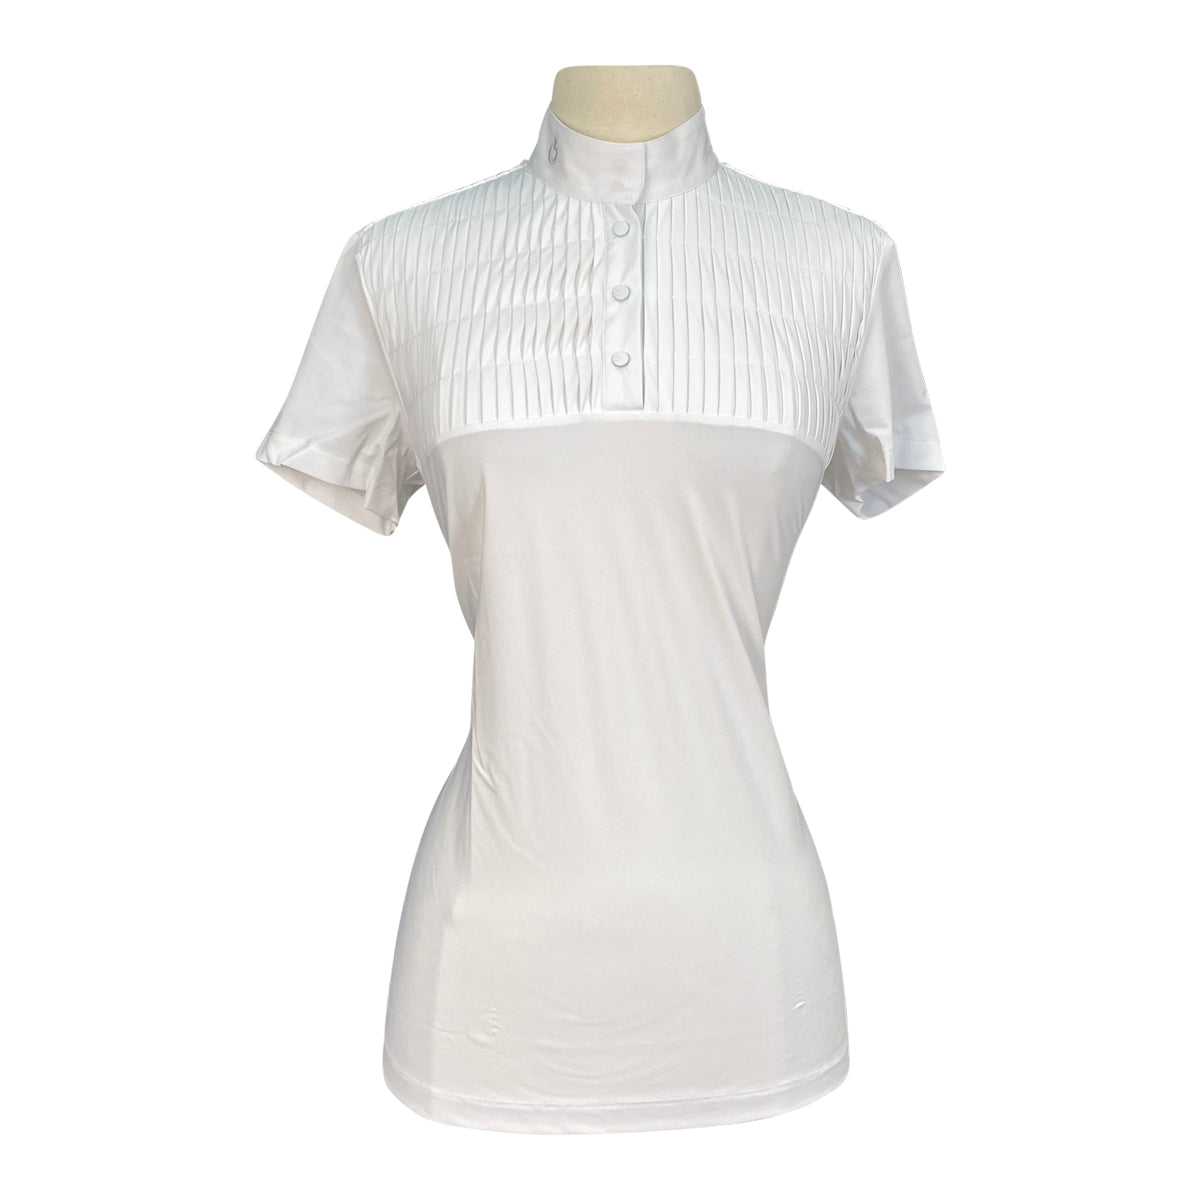 Cavalleria Toscana Jersey S/S Competition Shirt w/Pleated Bib